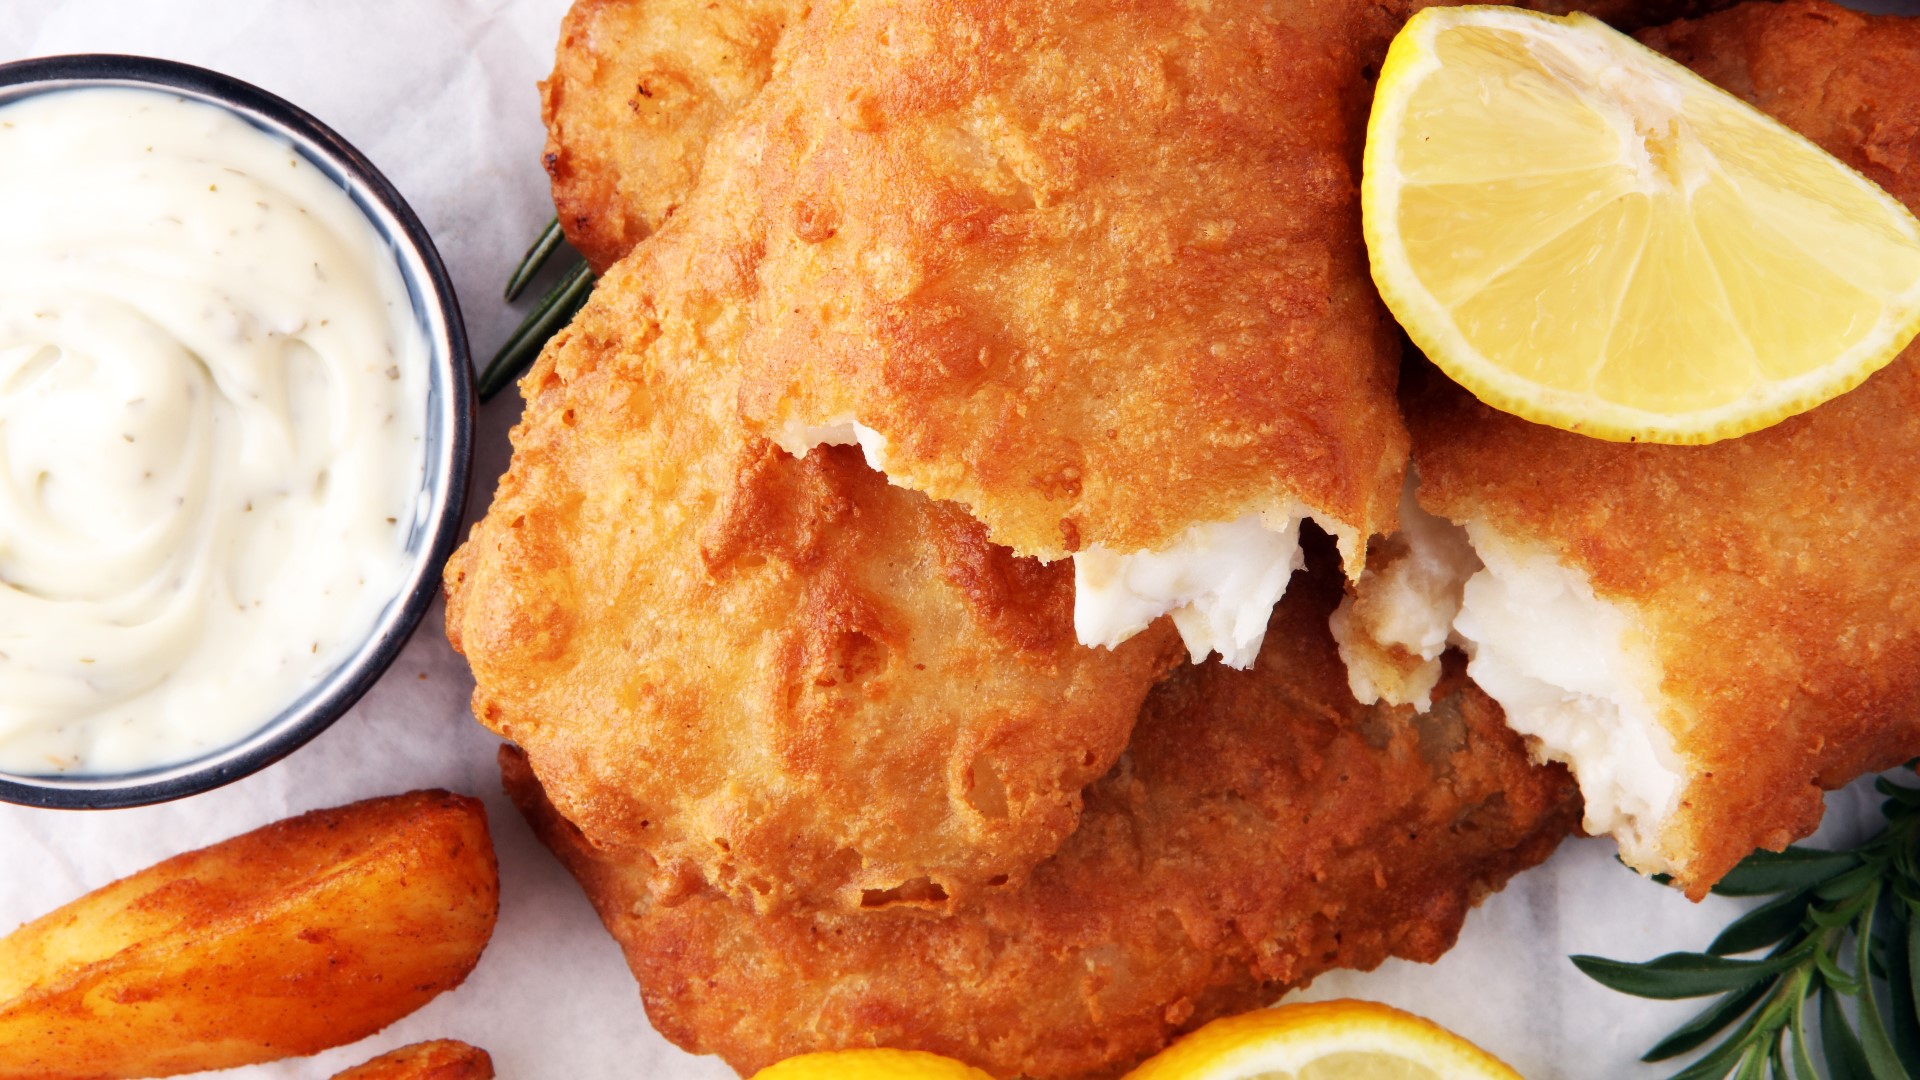 Where to find a fish fry in the Twin Cities